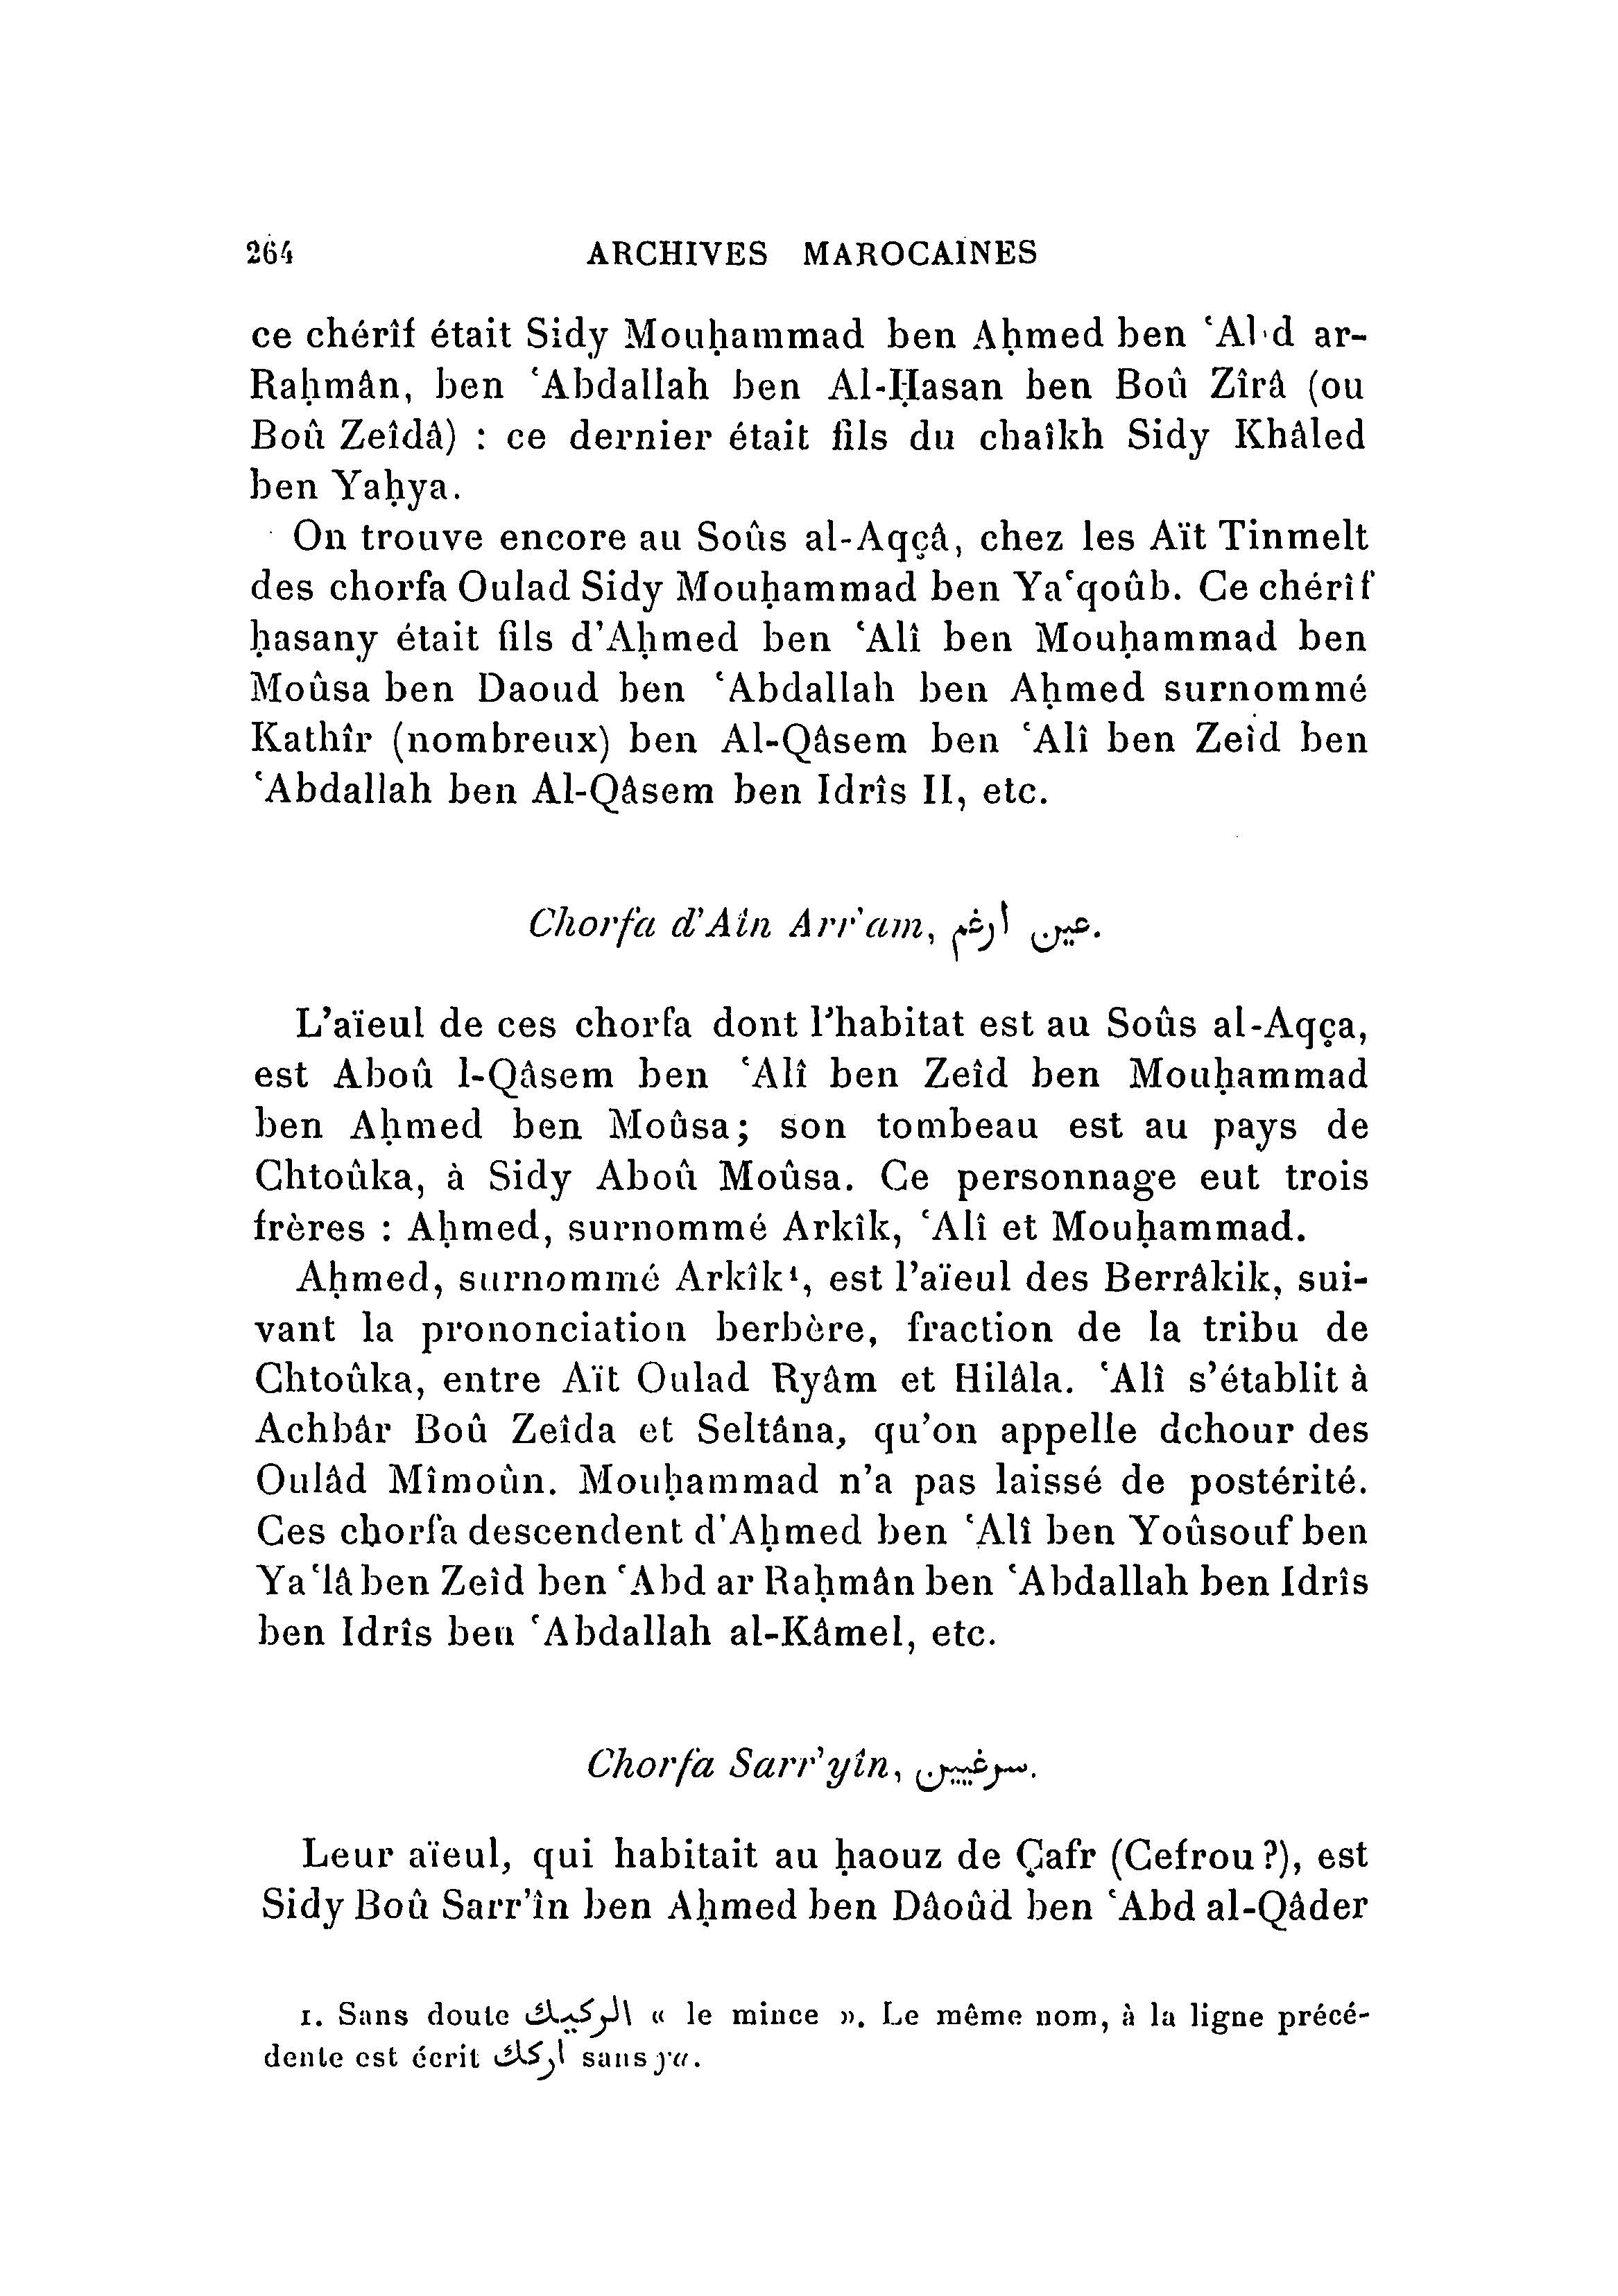 archives_marocaines-vol-2_1_page_439